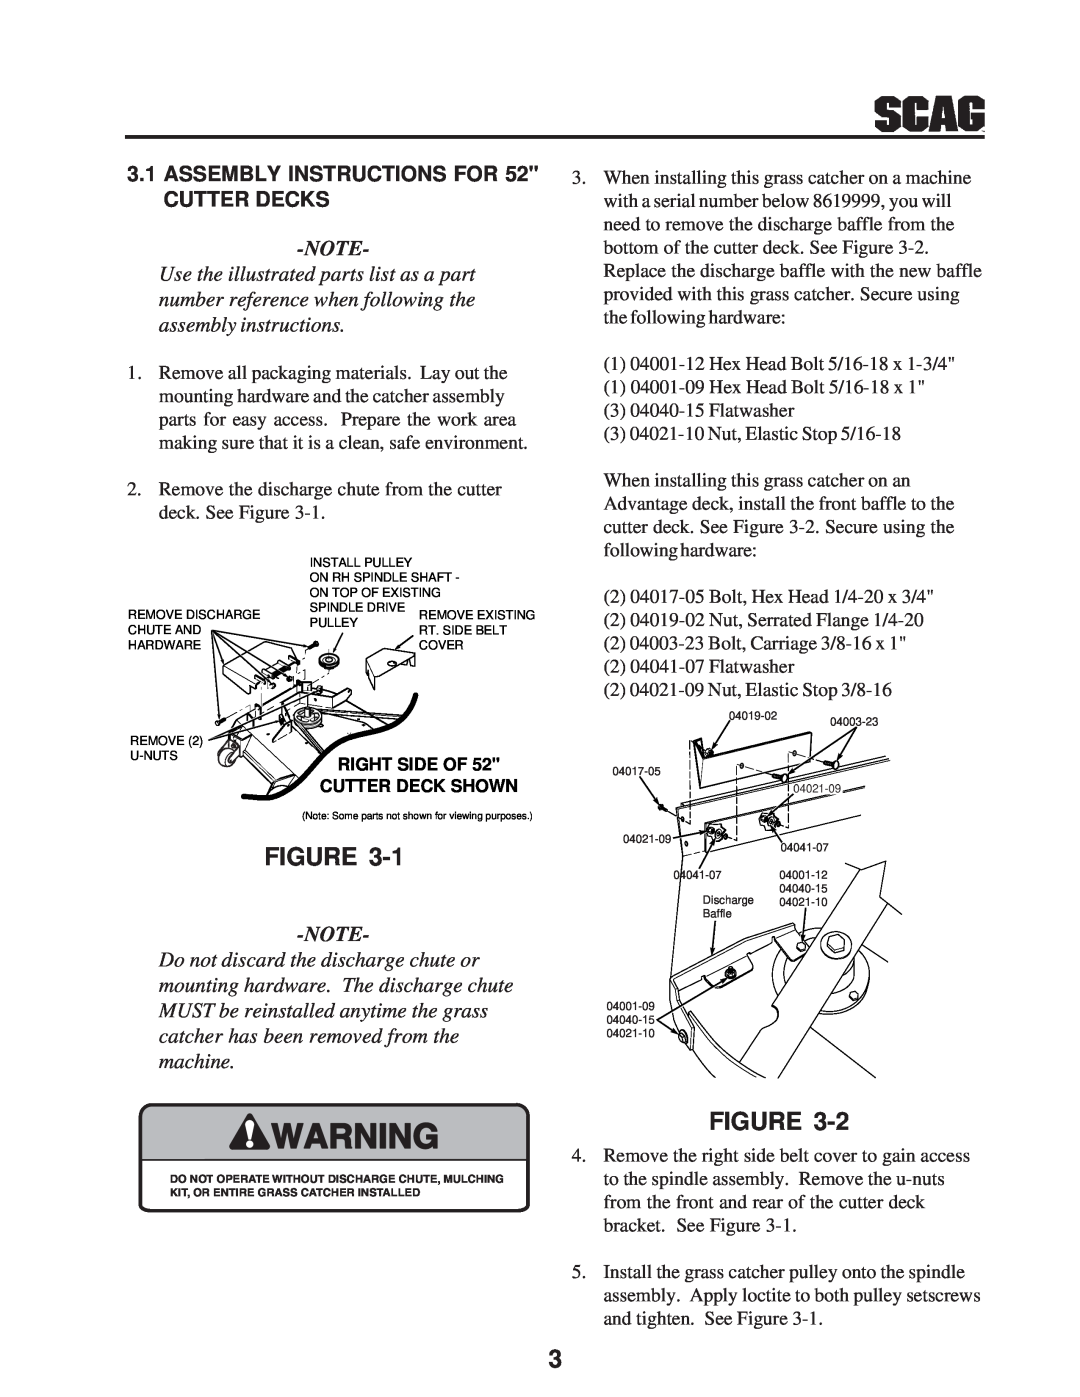 Scag Power Equipment GC-STT-CS manual ASSEMBLY INSTRUCTIONS FOR 52 CUTTER DECKS, Use the illustrated parts list as a part 